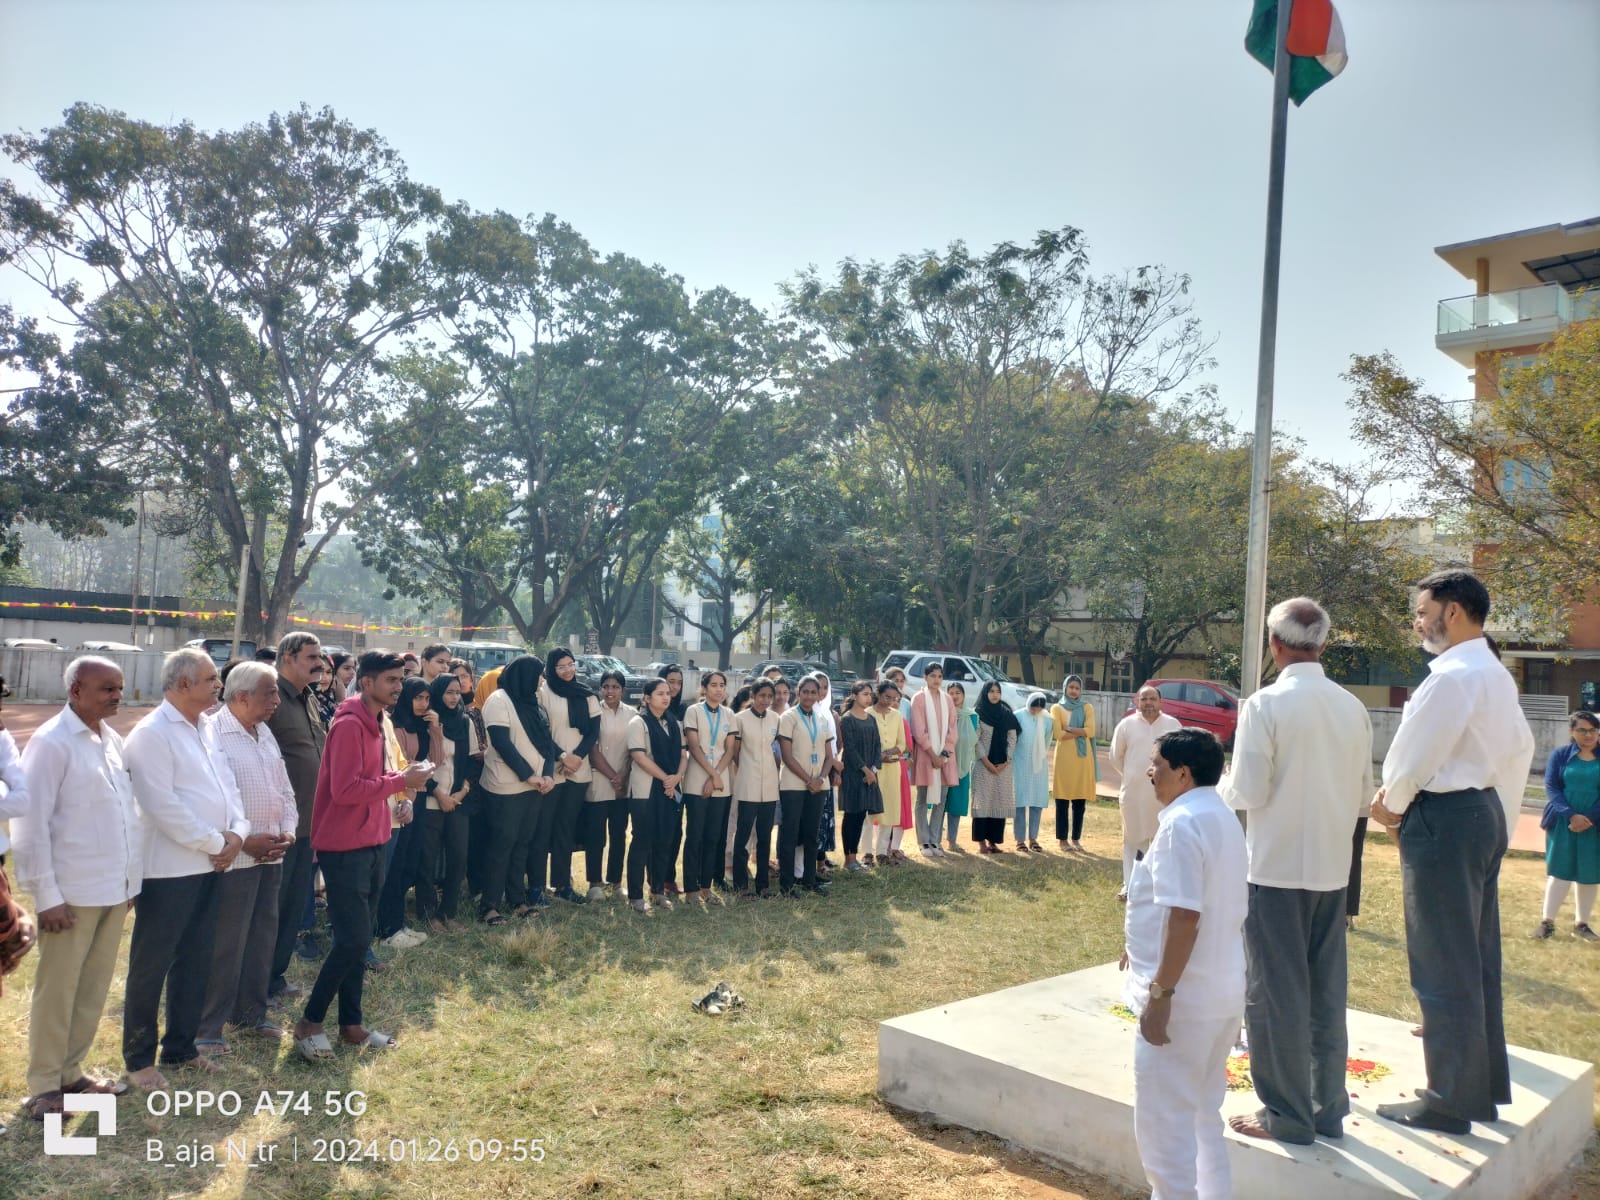 75th Republic day celebration at Heritage City Group of Institutions